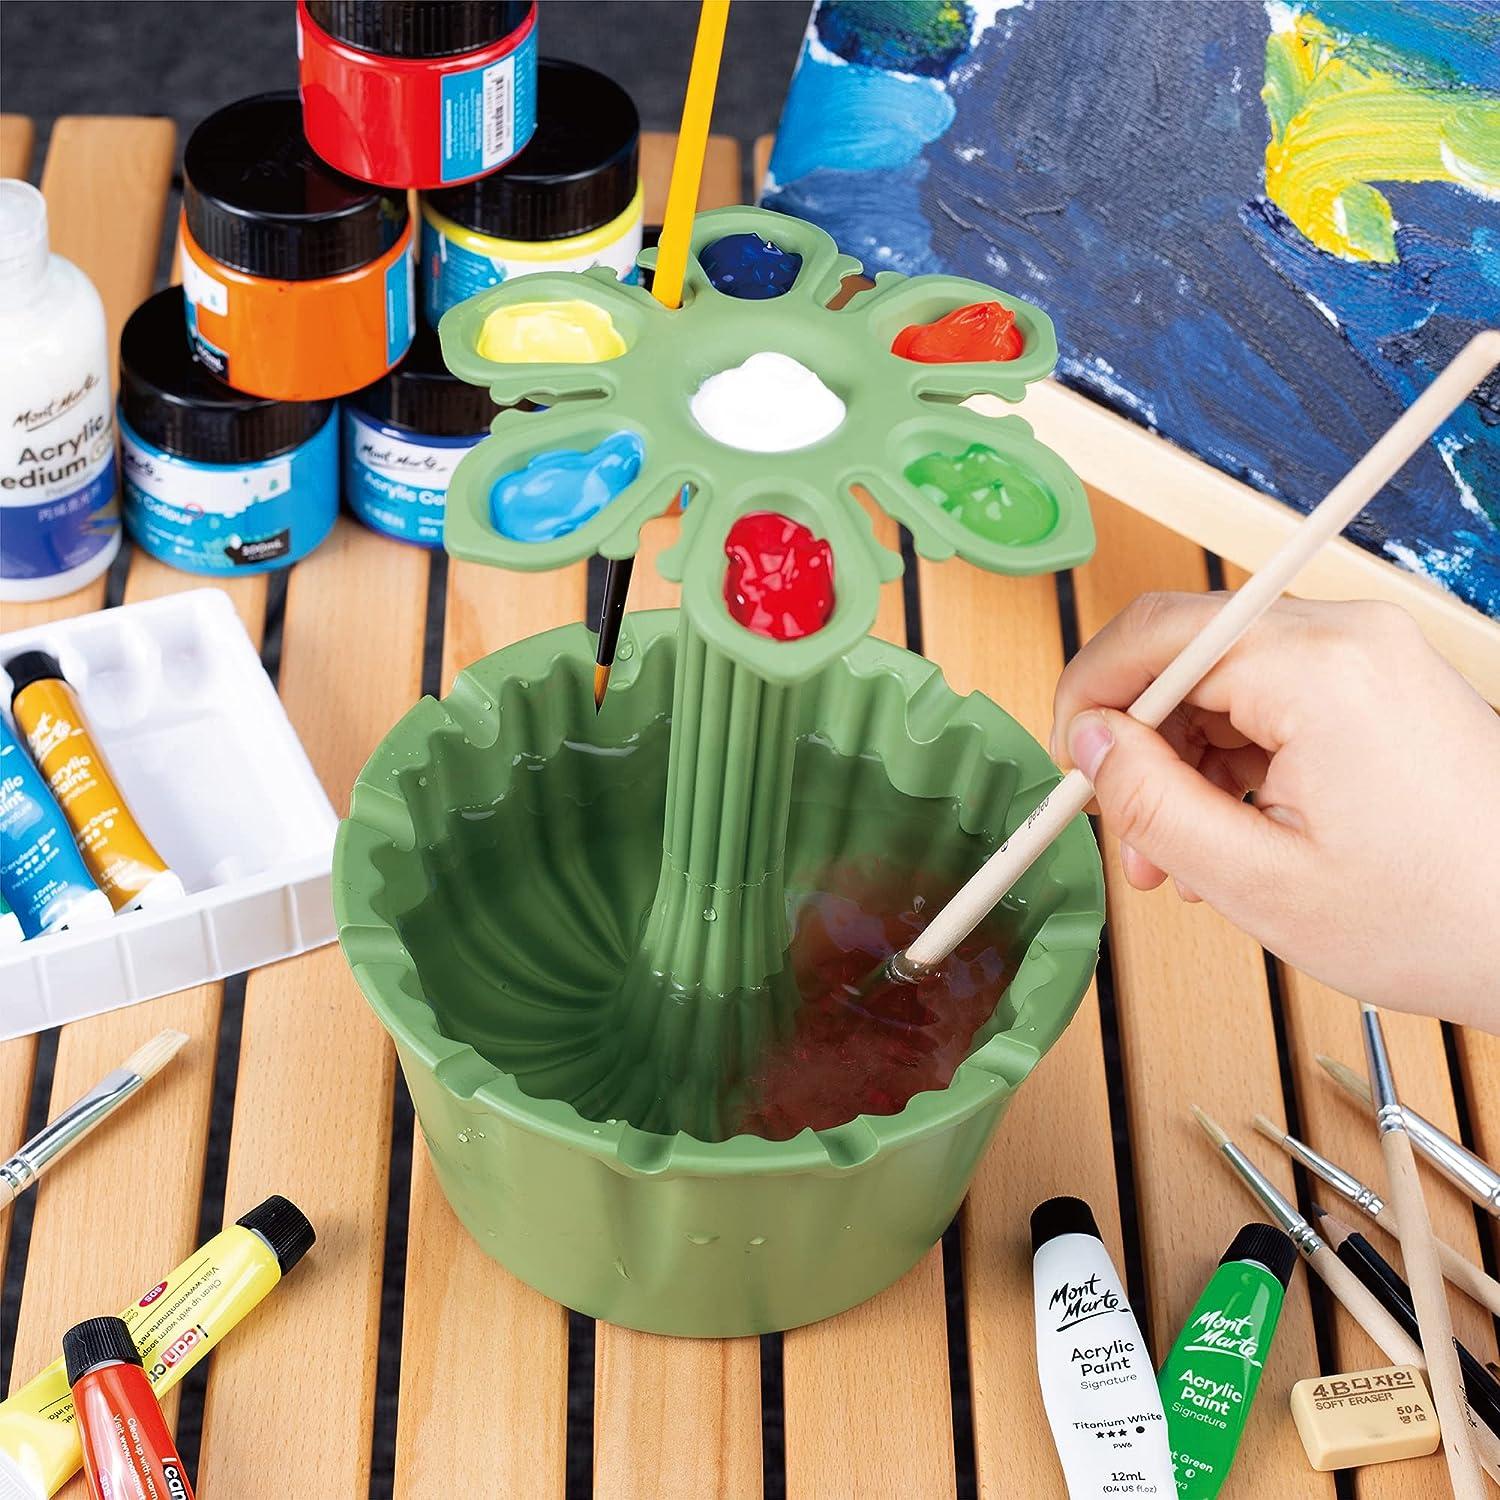 Paint Brush Cleaner Rinse Cup Basin All-in-One Brush Cleaning Washer Tank  Organizers With Brush Holder Palette for Artist Kids Acrylic Watercolor Oil  Water-Based Painting - Cute Flower Pot Design Green